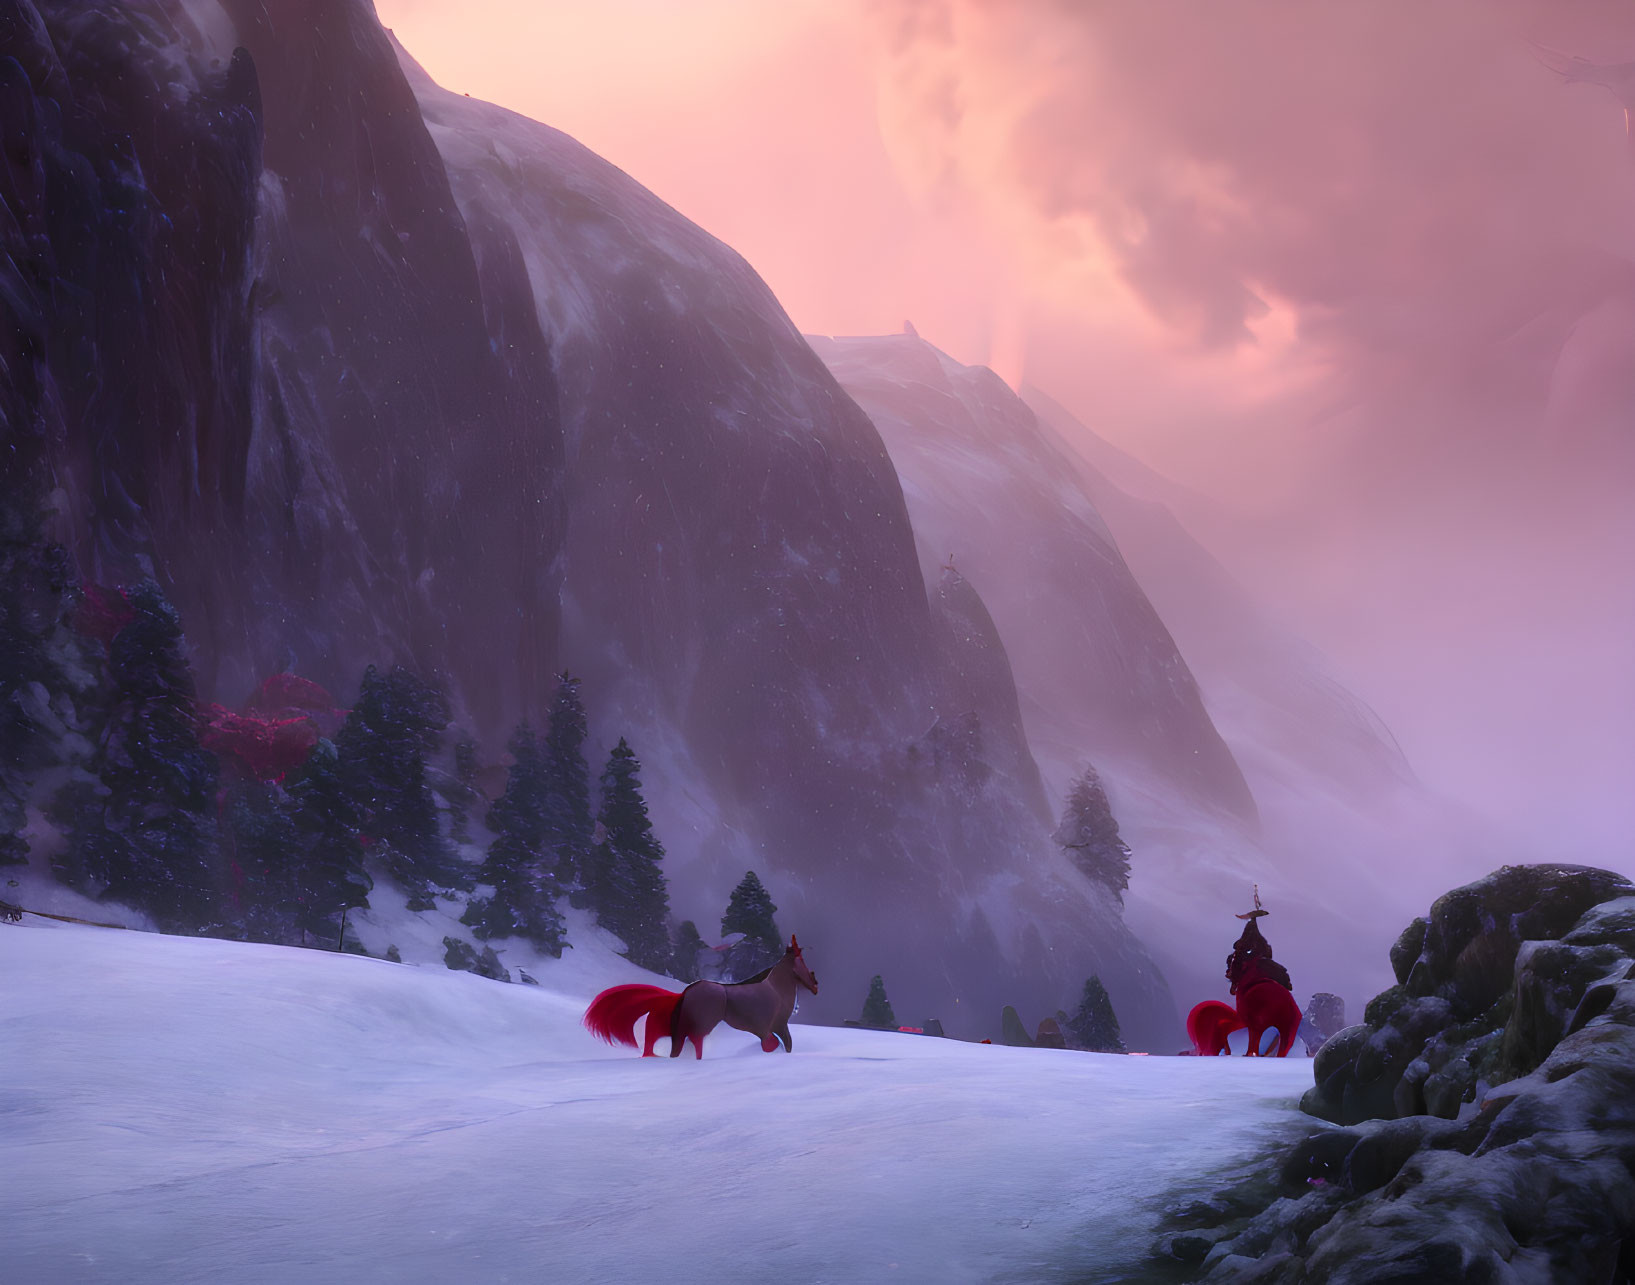 Snowy Dusk Landscape with Fox, Crimson Trees, Pagoda, and Misty Mountains in Pink